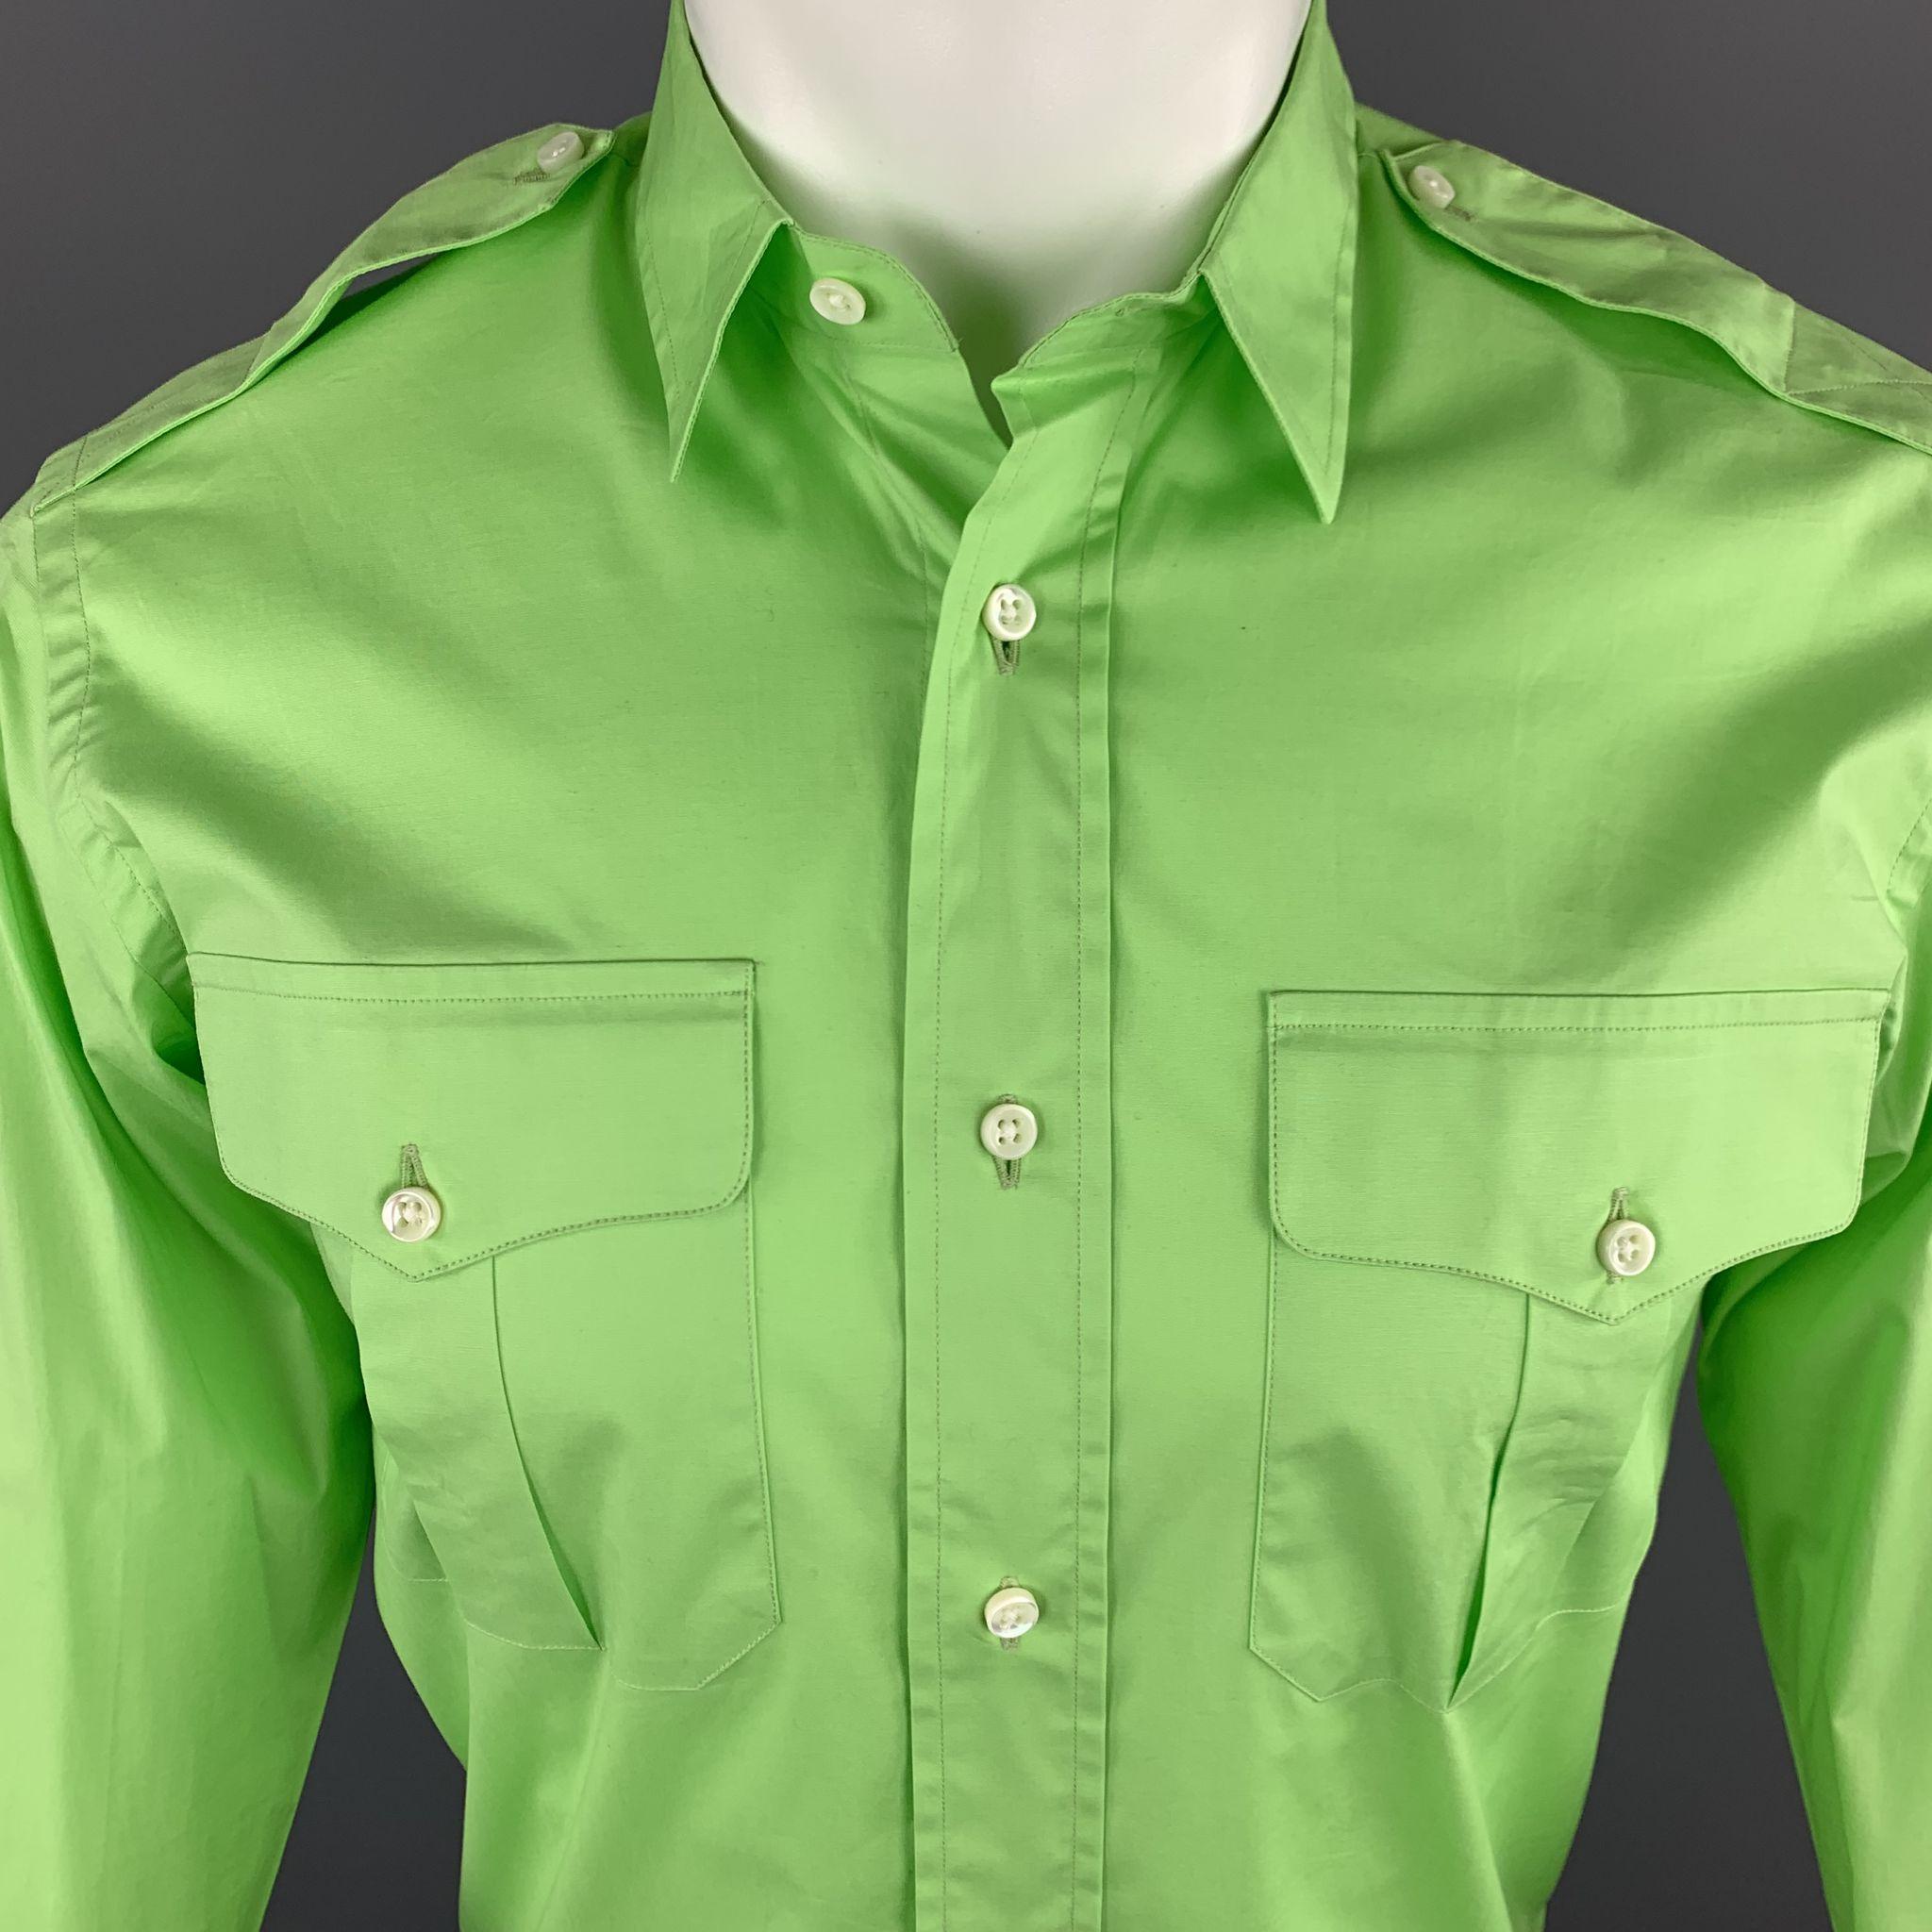 RALPH LAUREN BLACK LABEL Long Sleeve Shirt comes in a vibrant lime green tone in a solid cotton material, with epaulettes, patch pockets, buttoned cuffs, button up. Made in Italy.

New with Tags.
Marked: S
 
Measurements:
 
Shoulder: 16 in.
Chest: